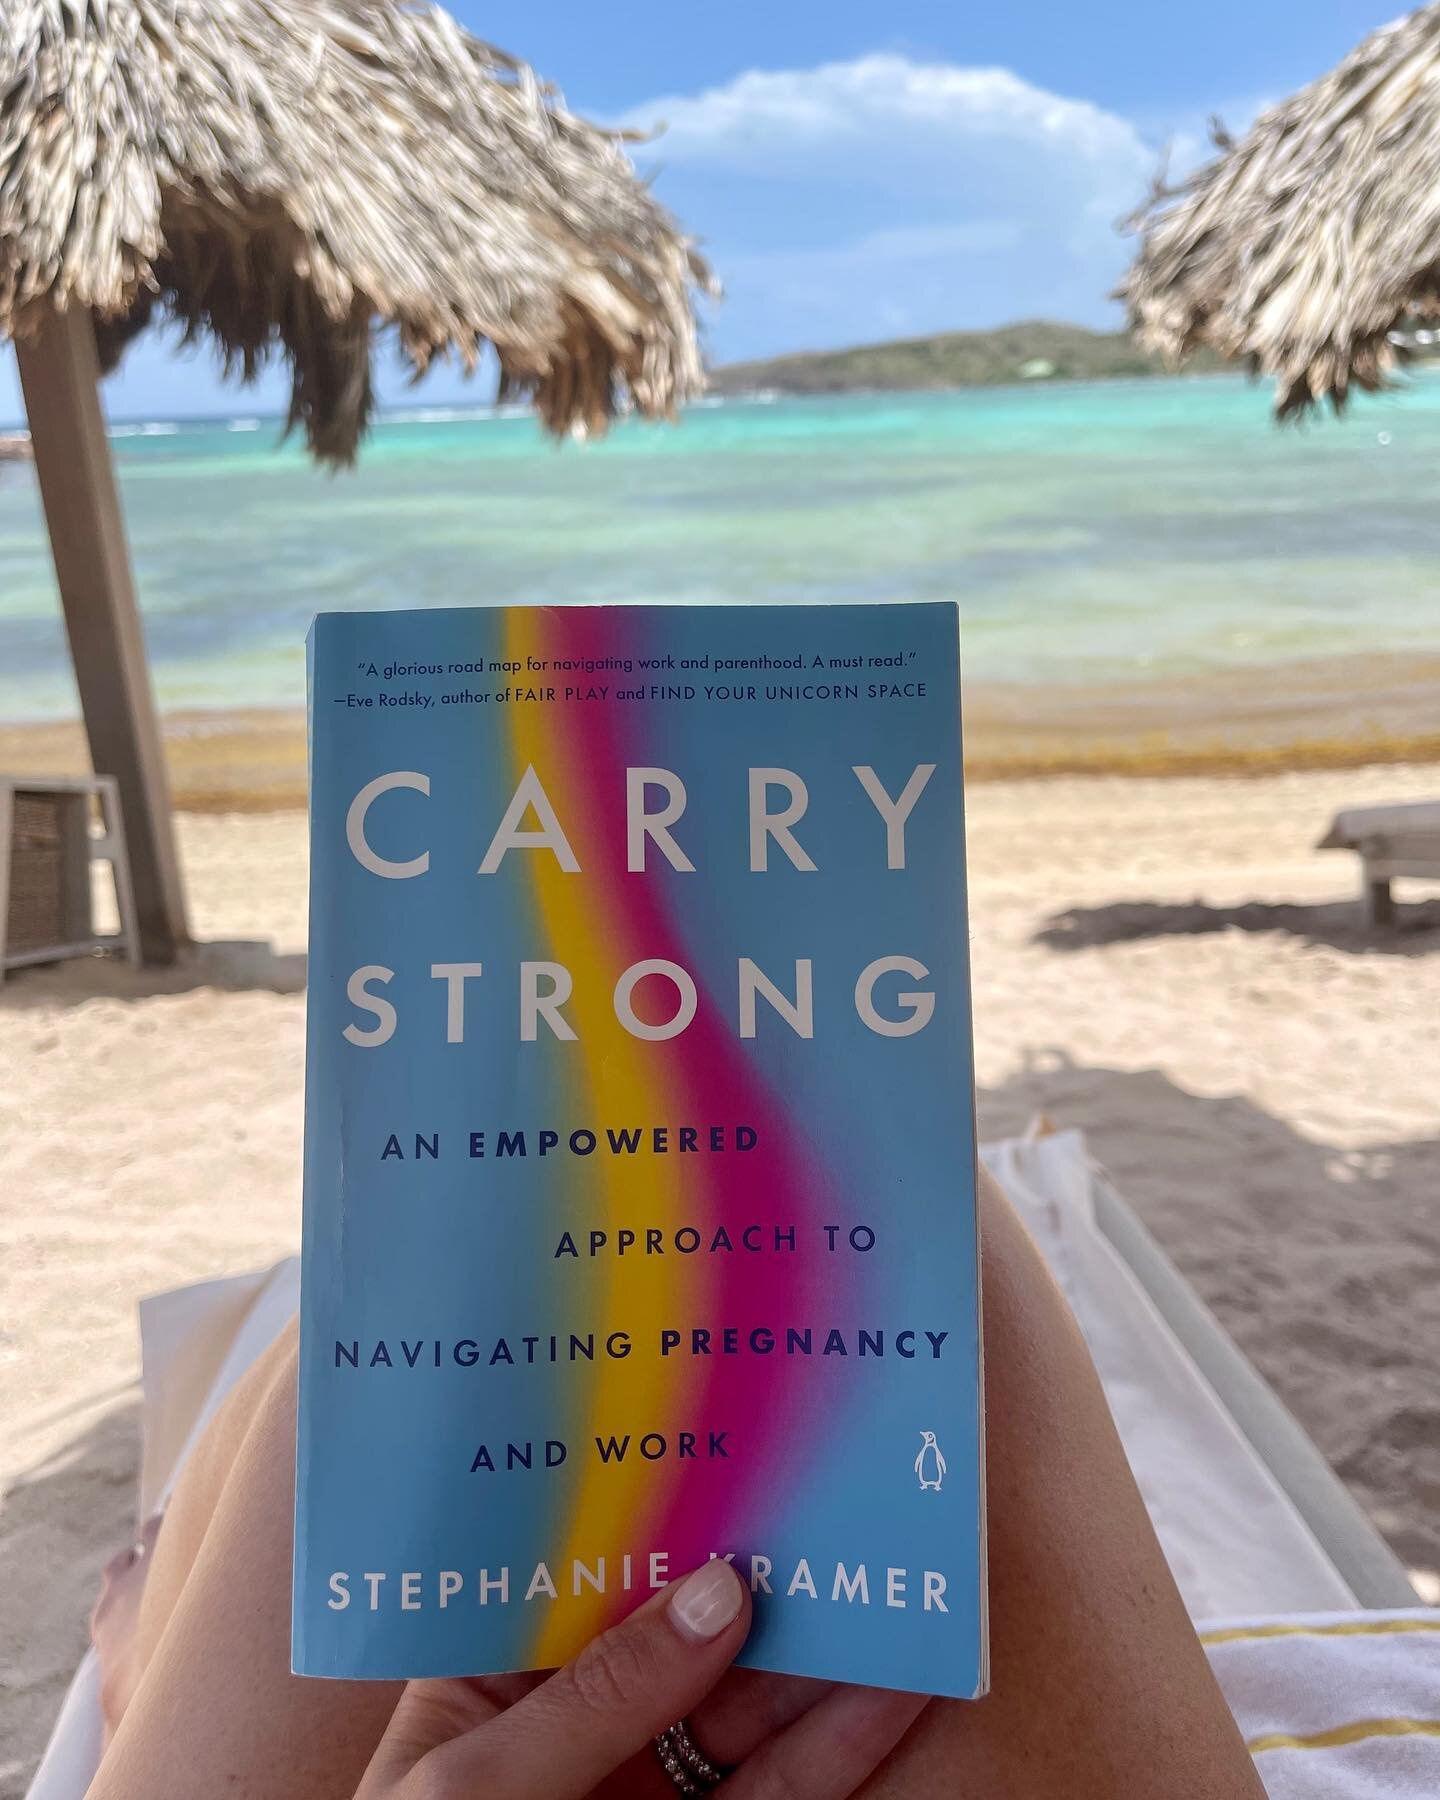 Savoring the last travel days of summer this &lsquo;Labor&rsquo; Day Weekend? 

Our summer readers proved #carrystrongbook is the perfect travel companion for any pre-TTC beach-day, baby moon or maternity-stay-cation adventure.

Take Carry Strong wit